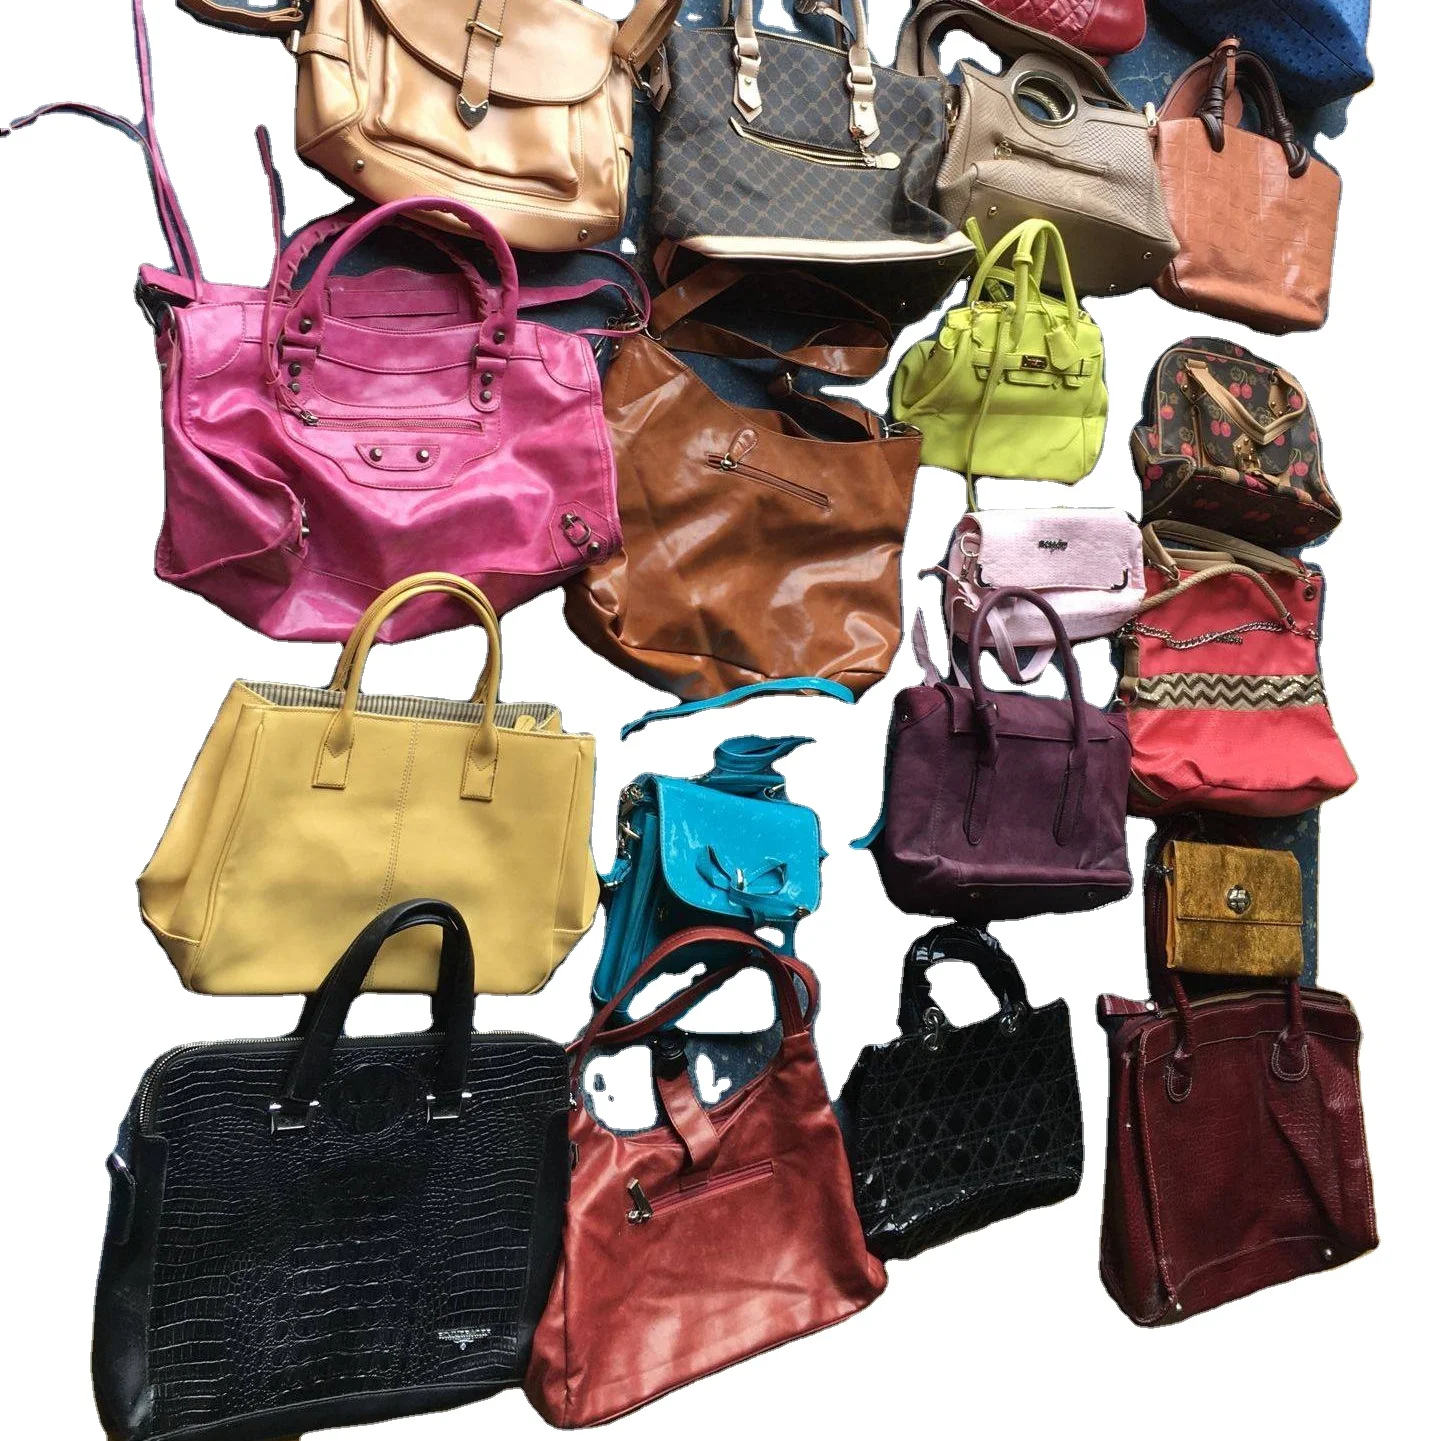 

Hot sale Top quality Ladies Leather Used Bags Bales Second Hand Bags, Black,white,red,blue,yellow,green,etc